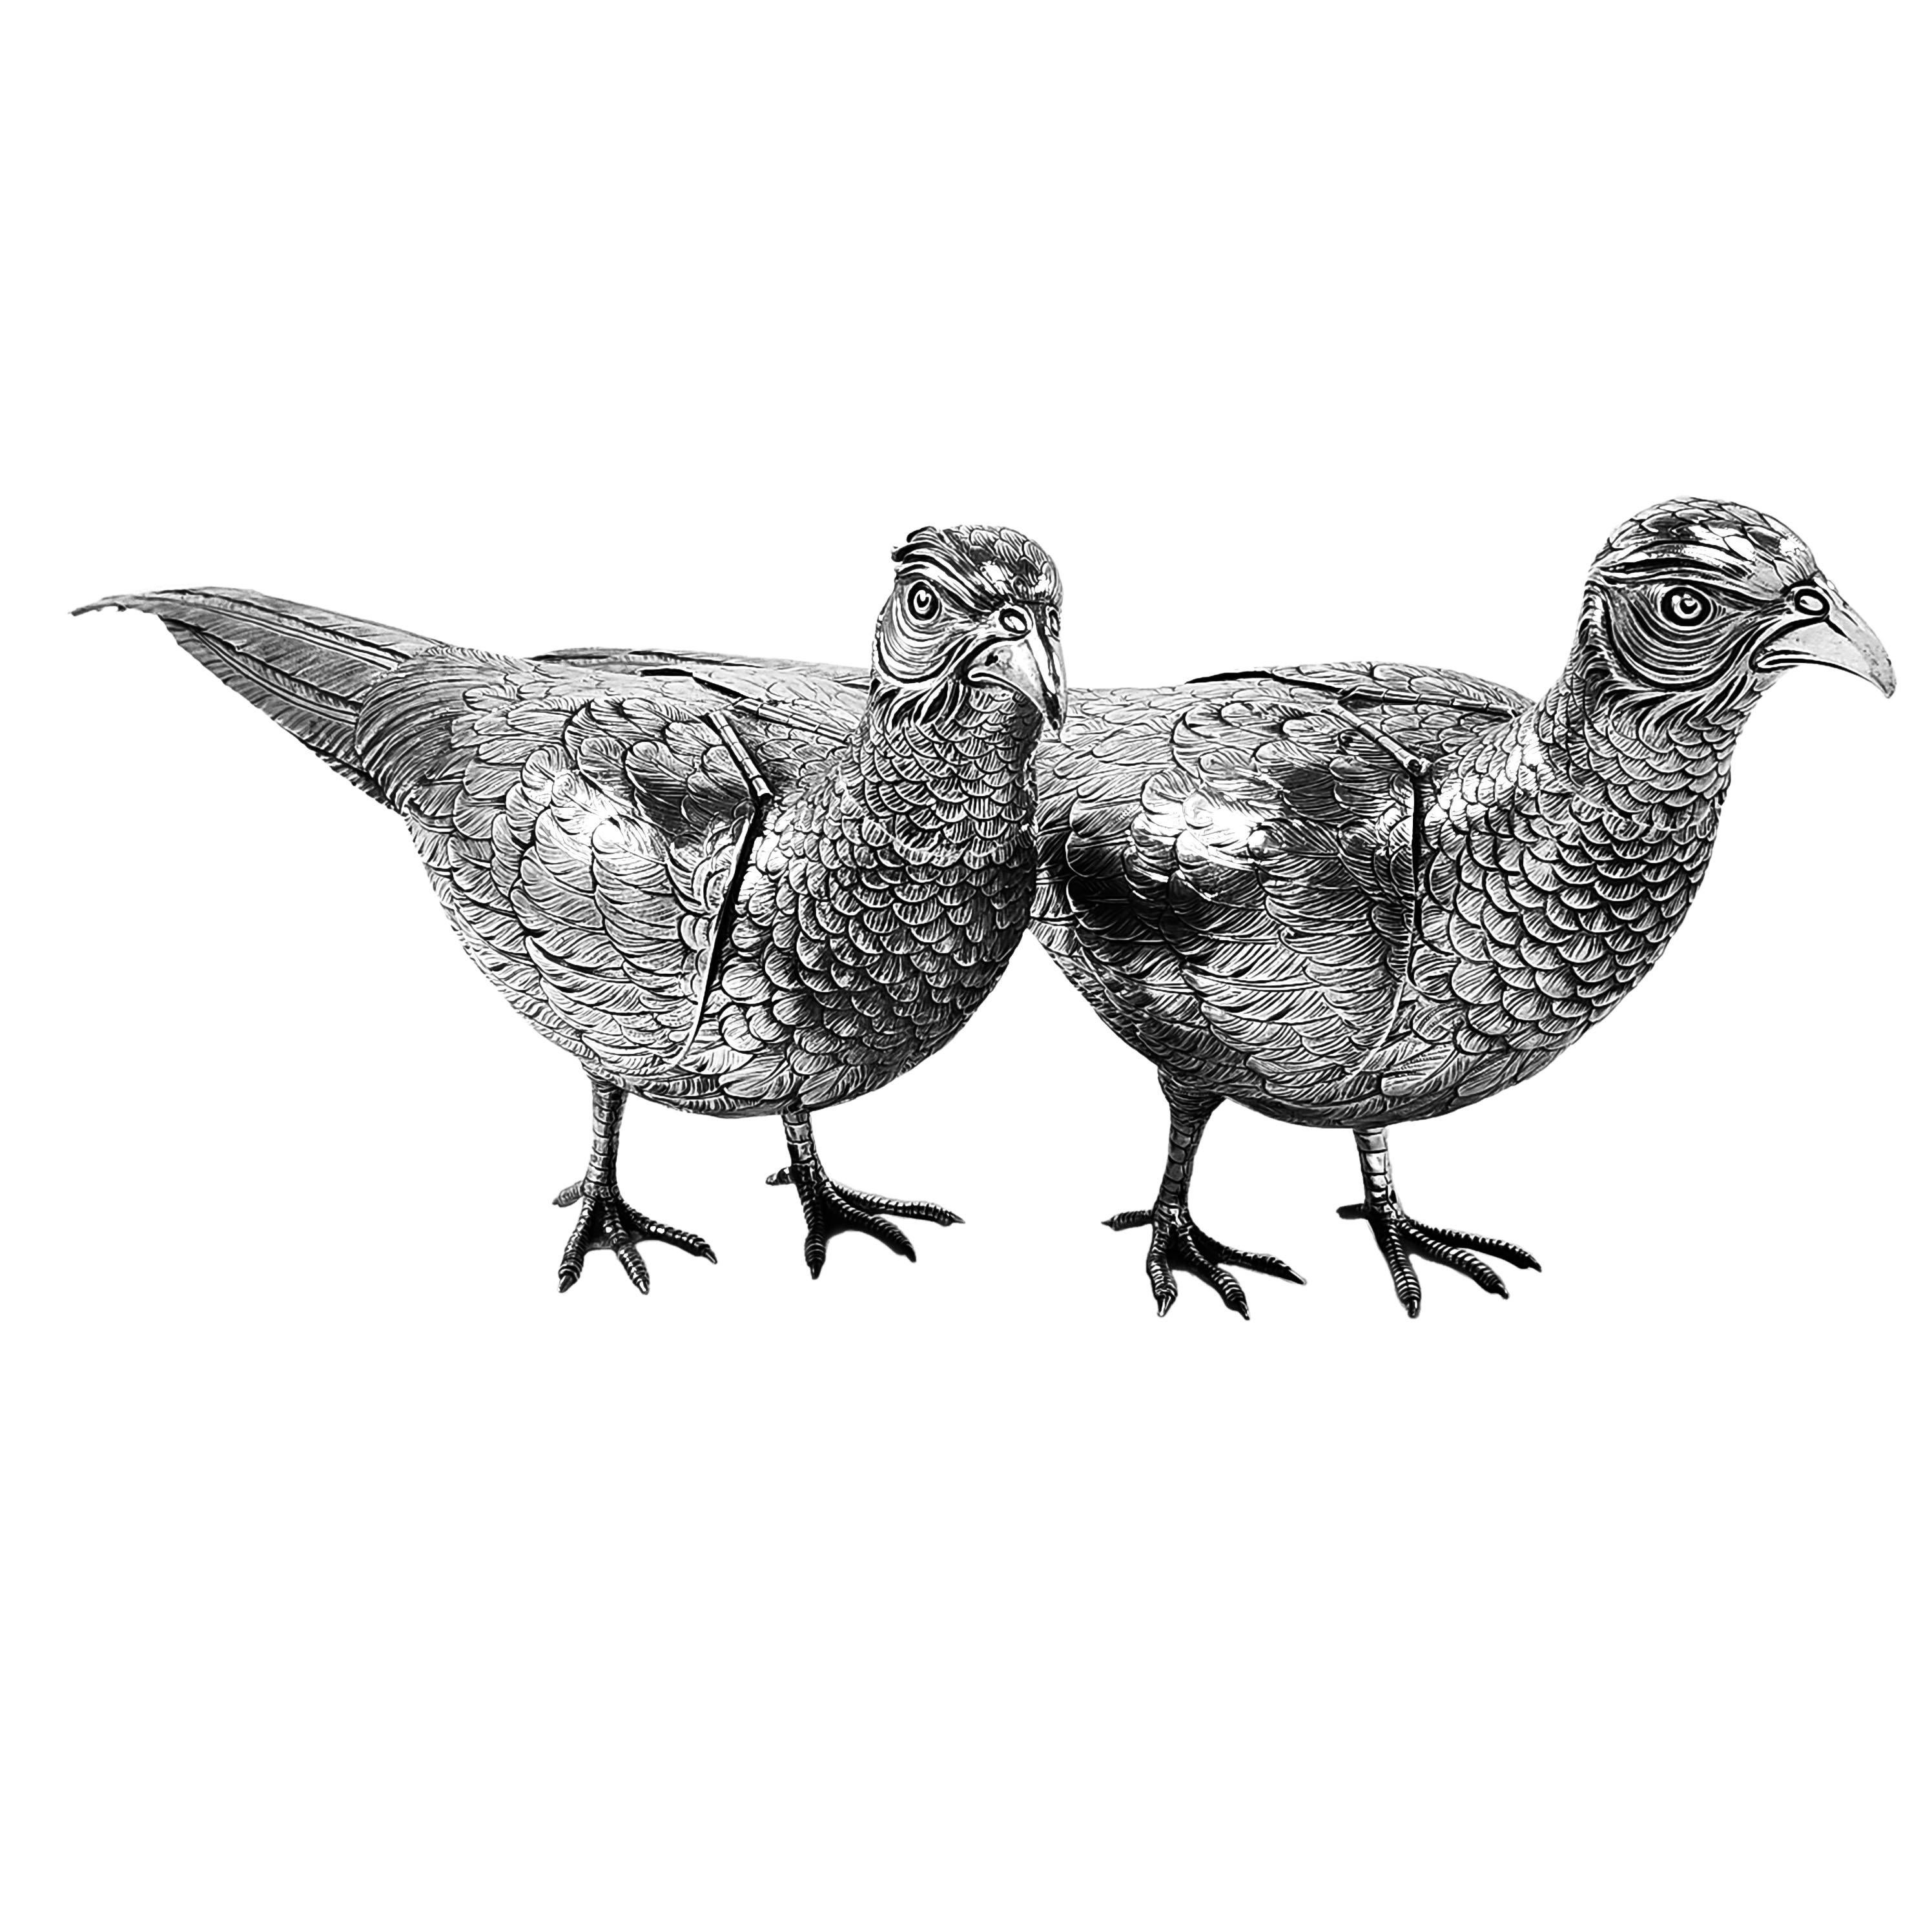 19th Century Large Antique German Sterling Silver Pheasants c. 1890 Continental Model Birds For Sale